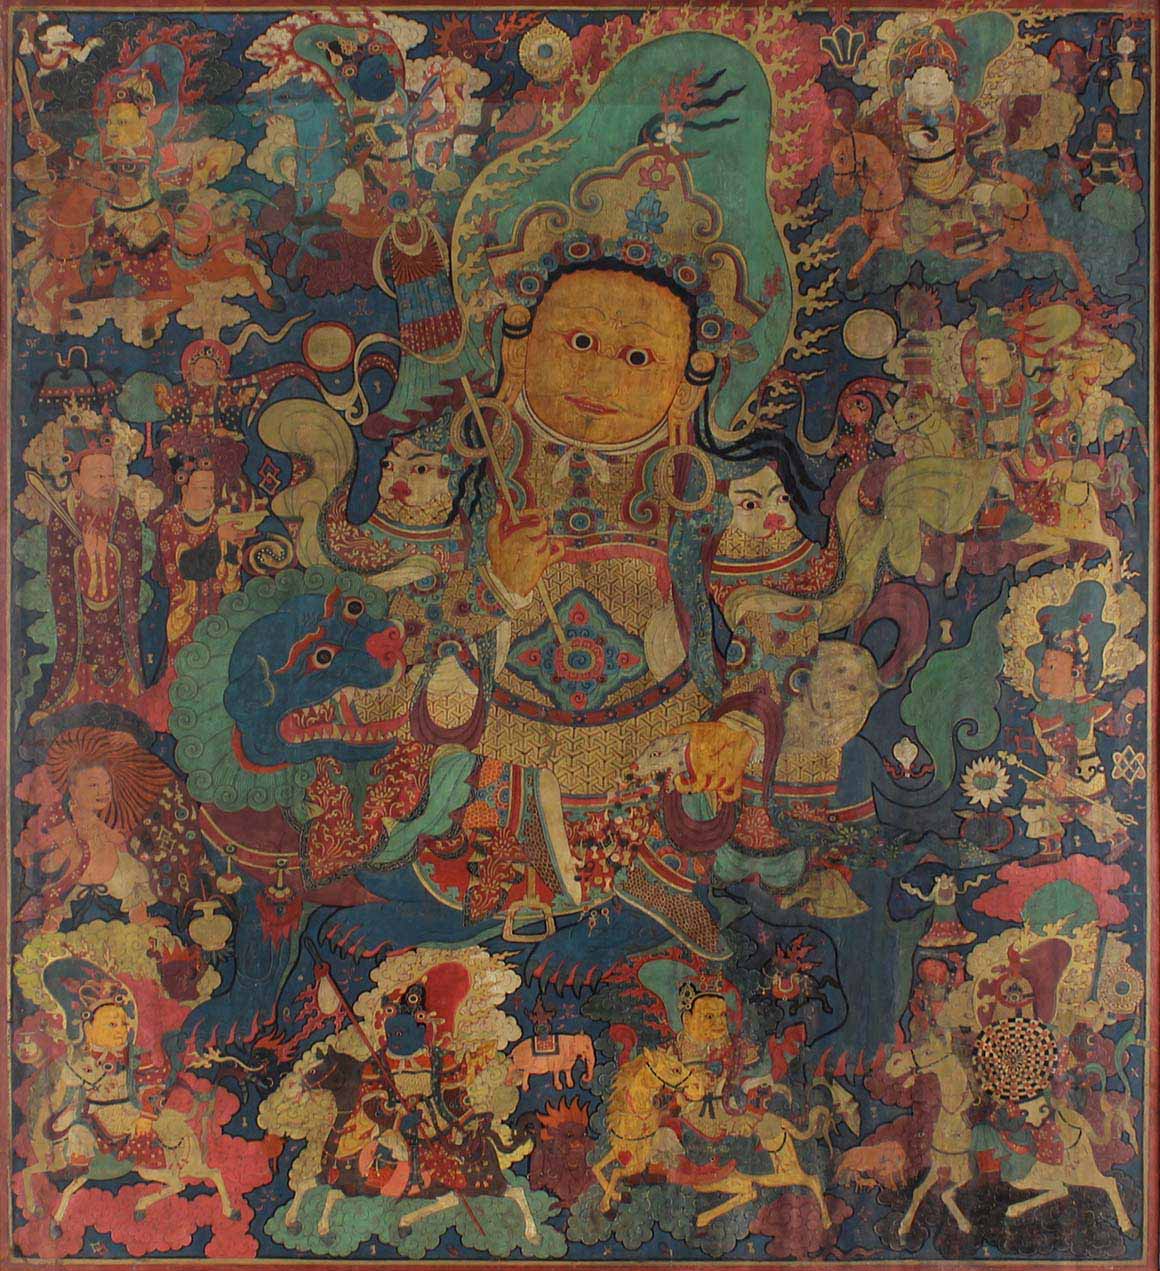 Photograph of painting of Vaishravana, Guardian of Buddhism and Protector of Riches. Tibet, early 15th century. Distemper on cloth. Image: 32 × 29 1/8 in. (81.3 × 73.9 cm). Purchase, Gift of Florence and Herbert Irving, by exchange, 2021 (2021.290)